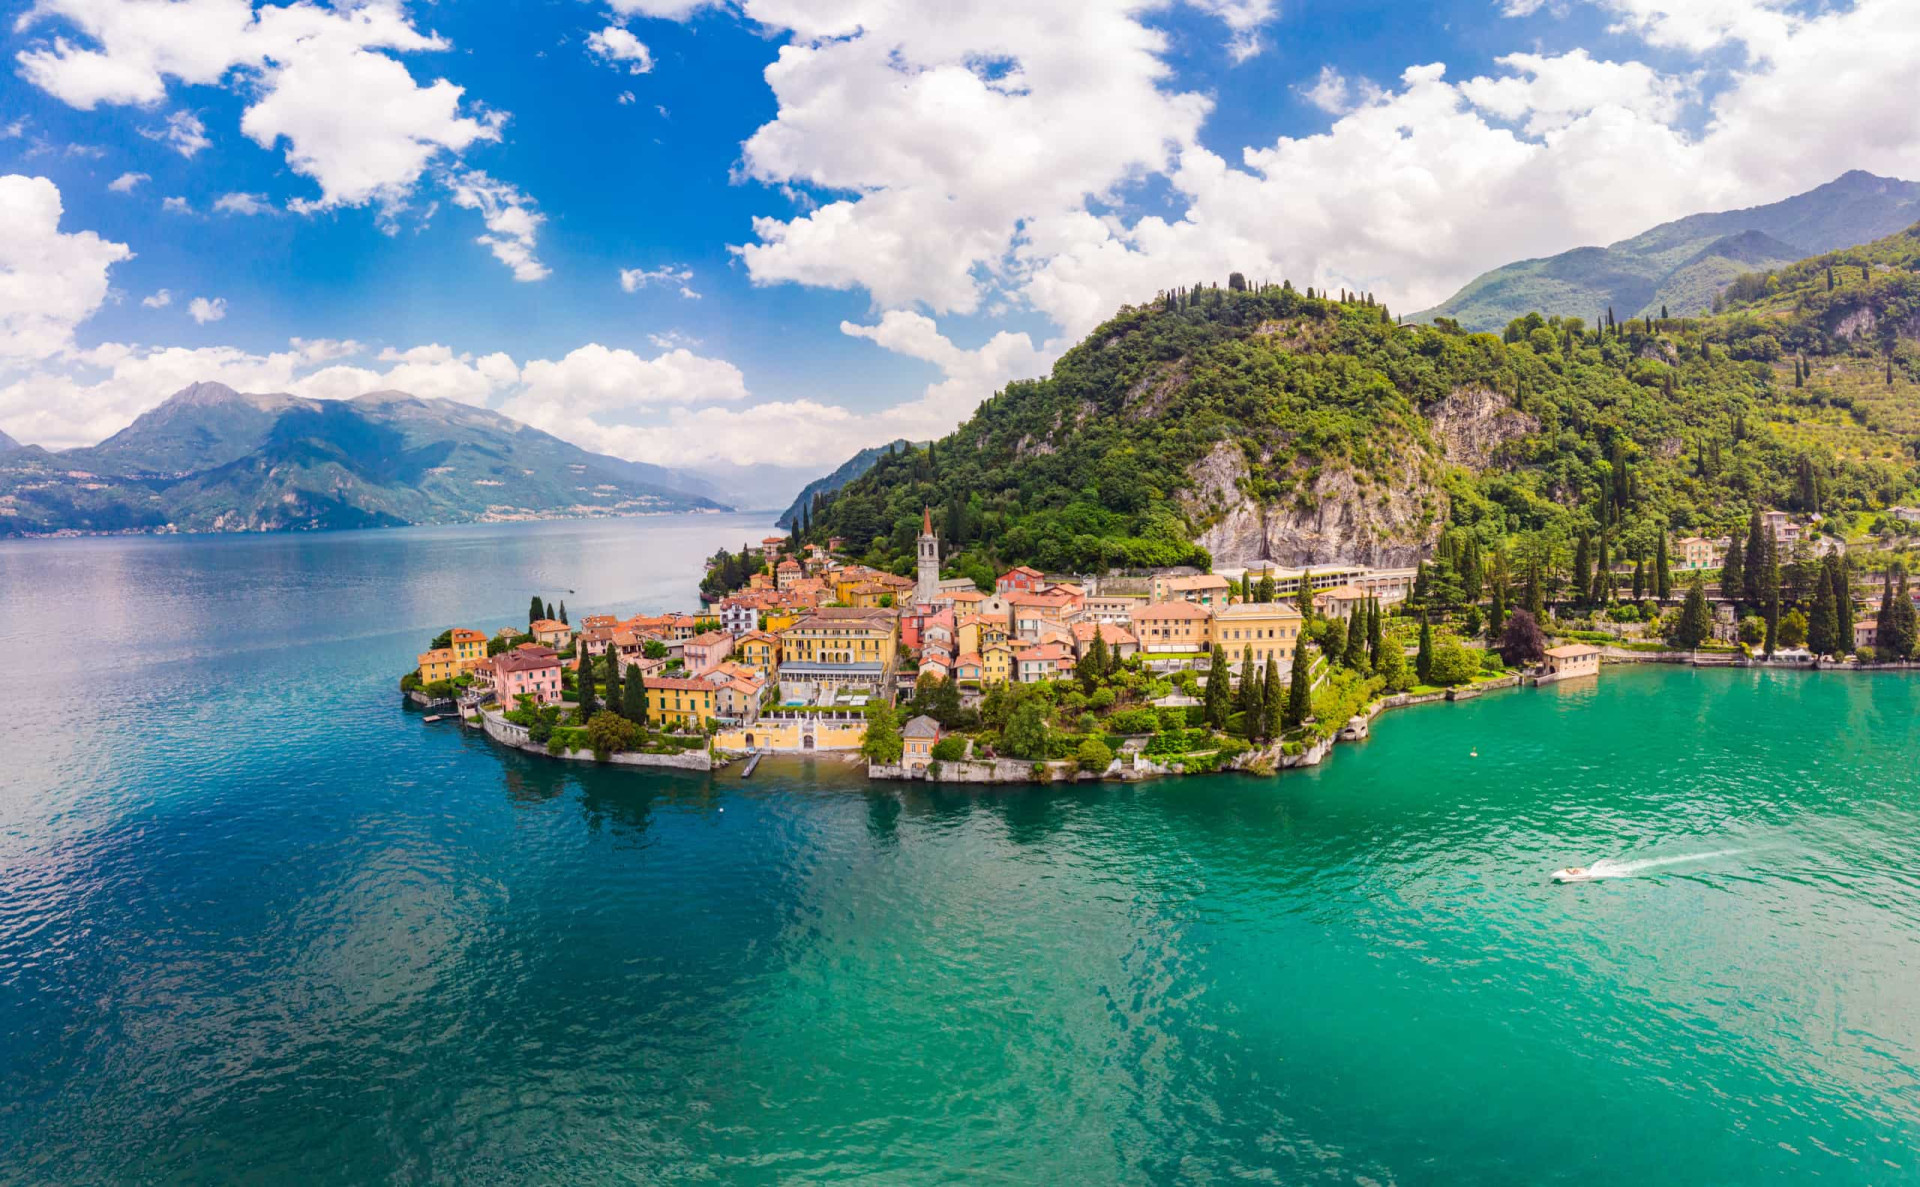 <p>One of Lake Como's most appealing waterfront towns, Varenna's spruce gardens and historic villas lend the destination a wonderfully romantic quality.</p>